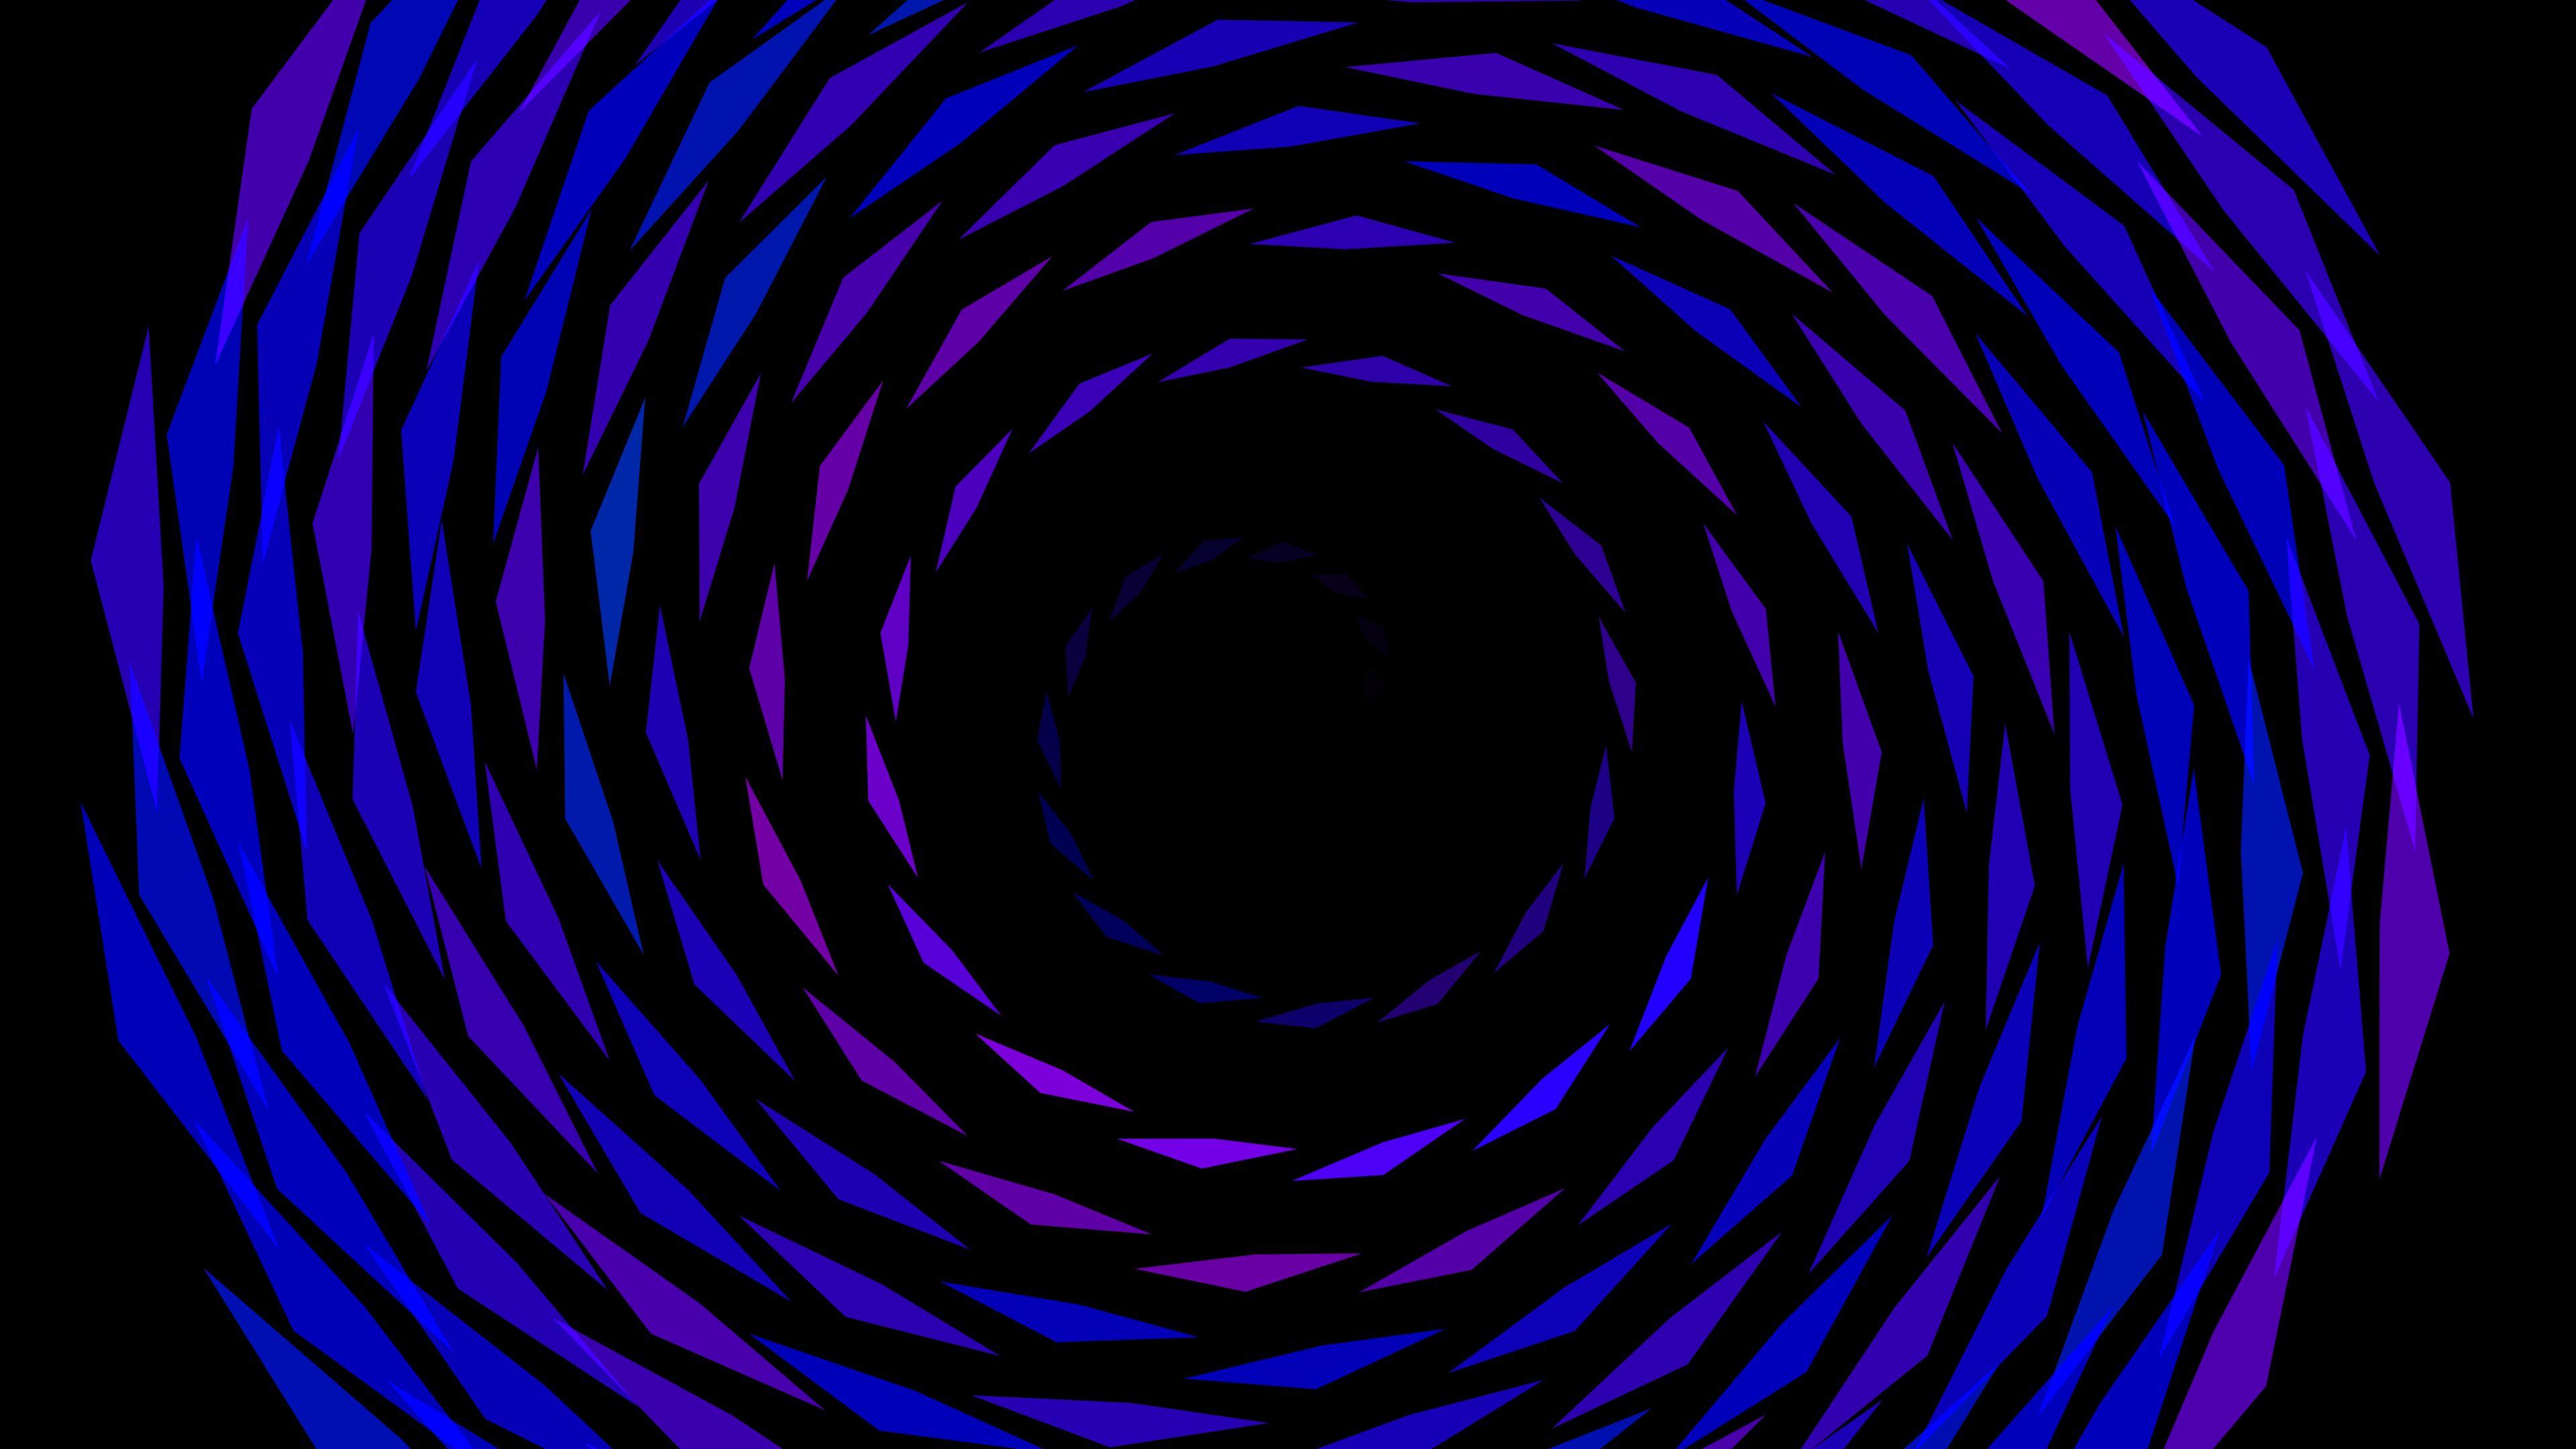 black, spiral, abstract, twisting, torsion, fragments phone background